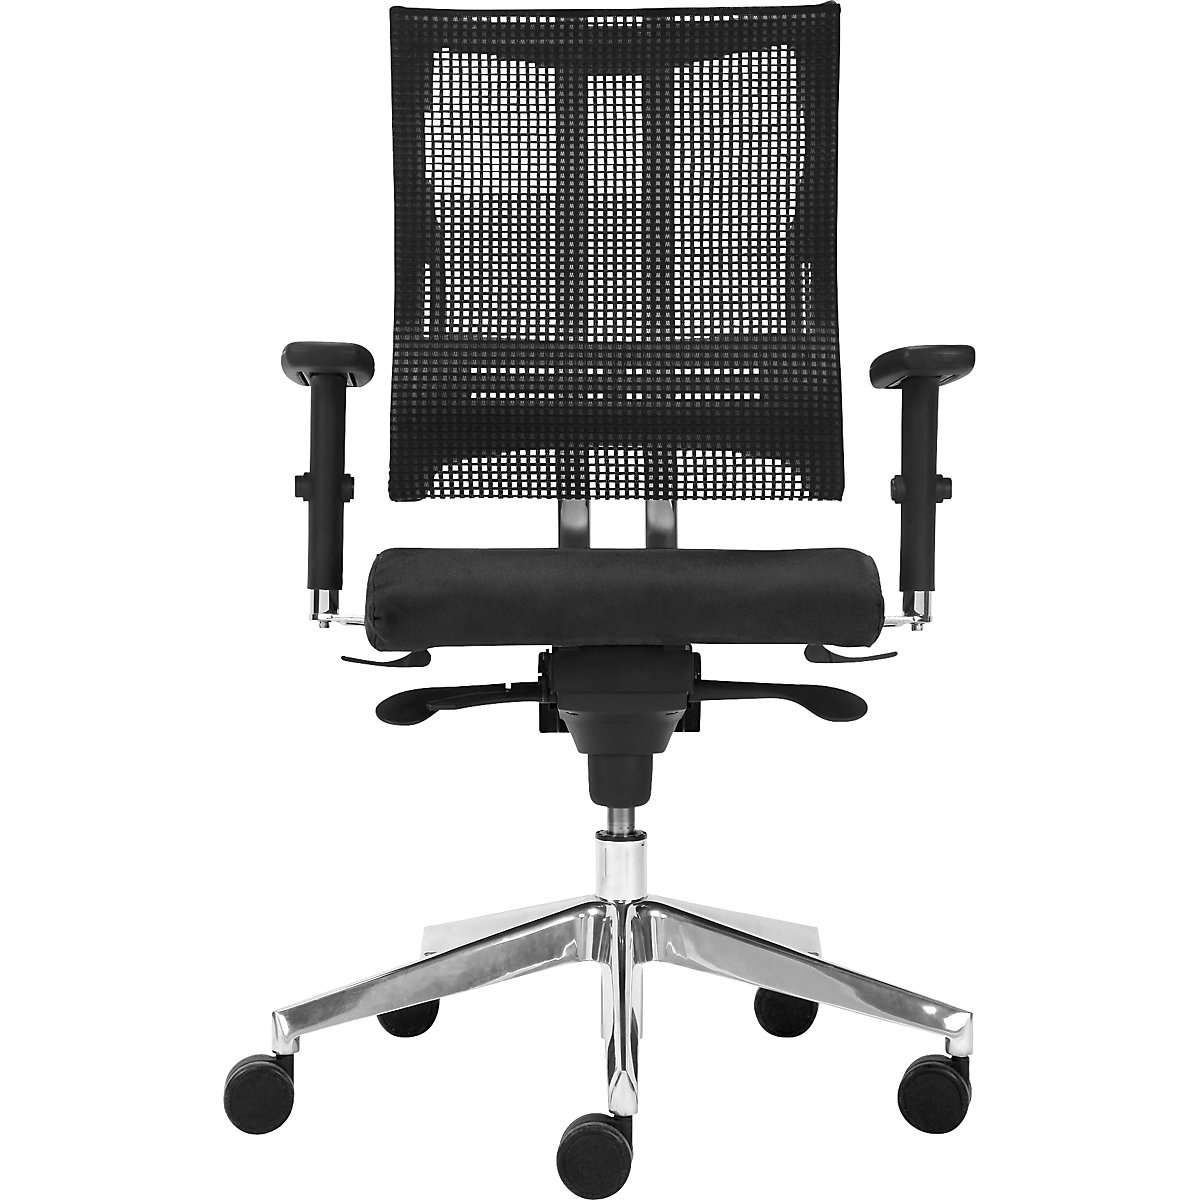 NET-MOTION office swivel chair, with mesh back rest and lumbar support, black back rest and seat, chrome plated frame